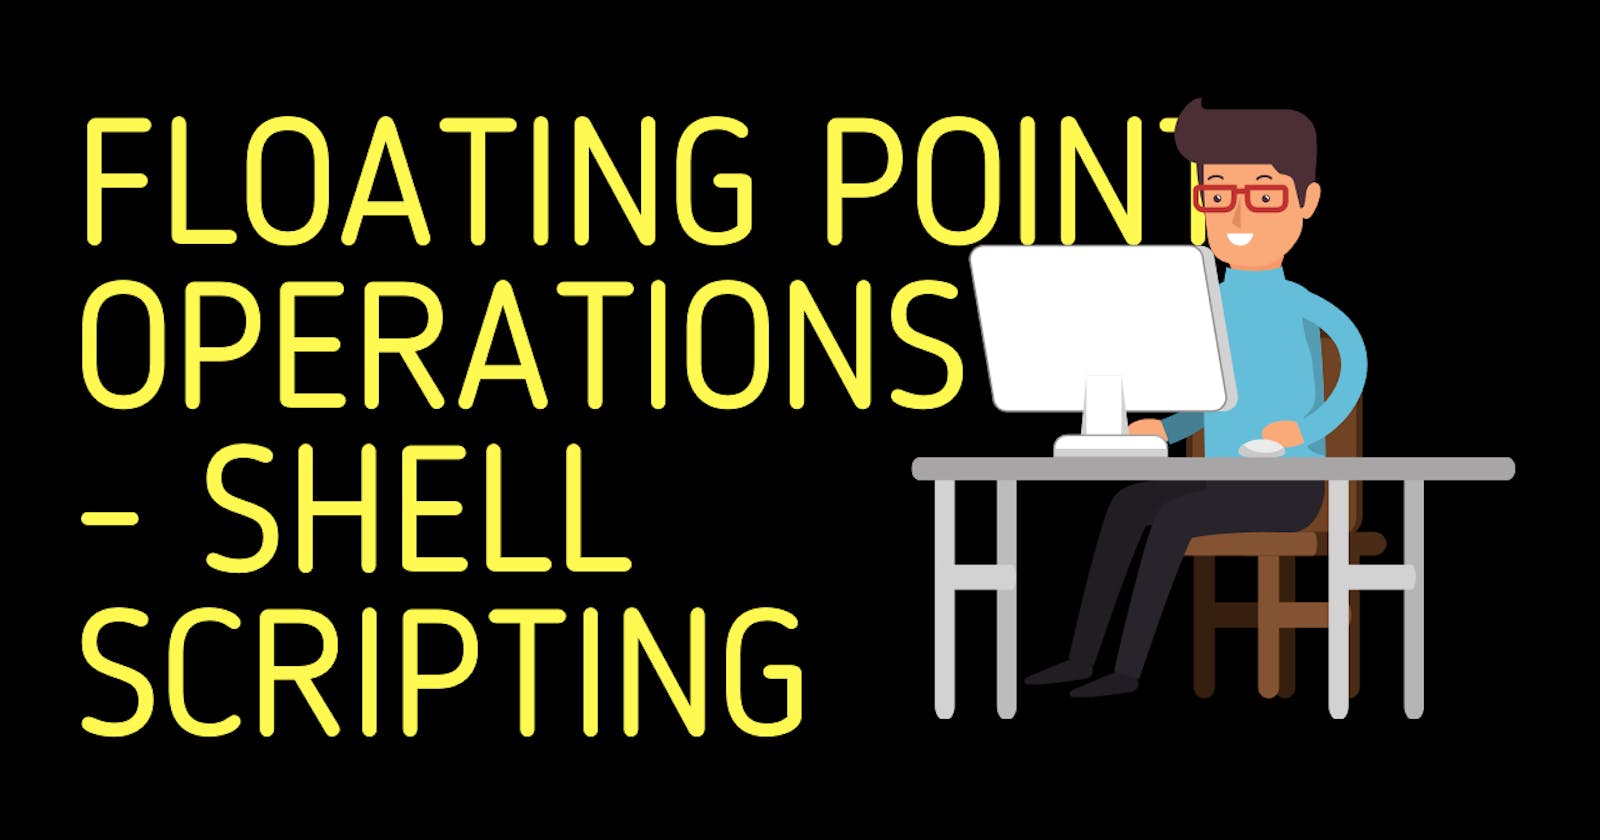 Floating Point Operations | Shell Scripting